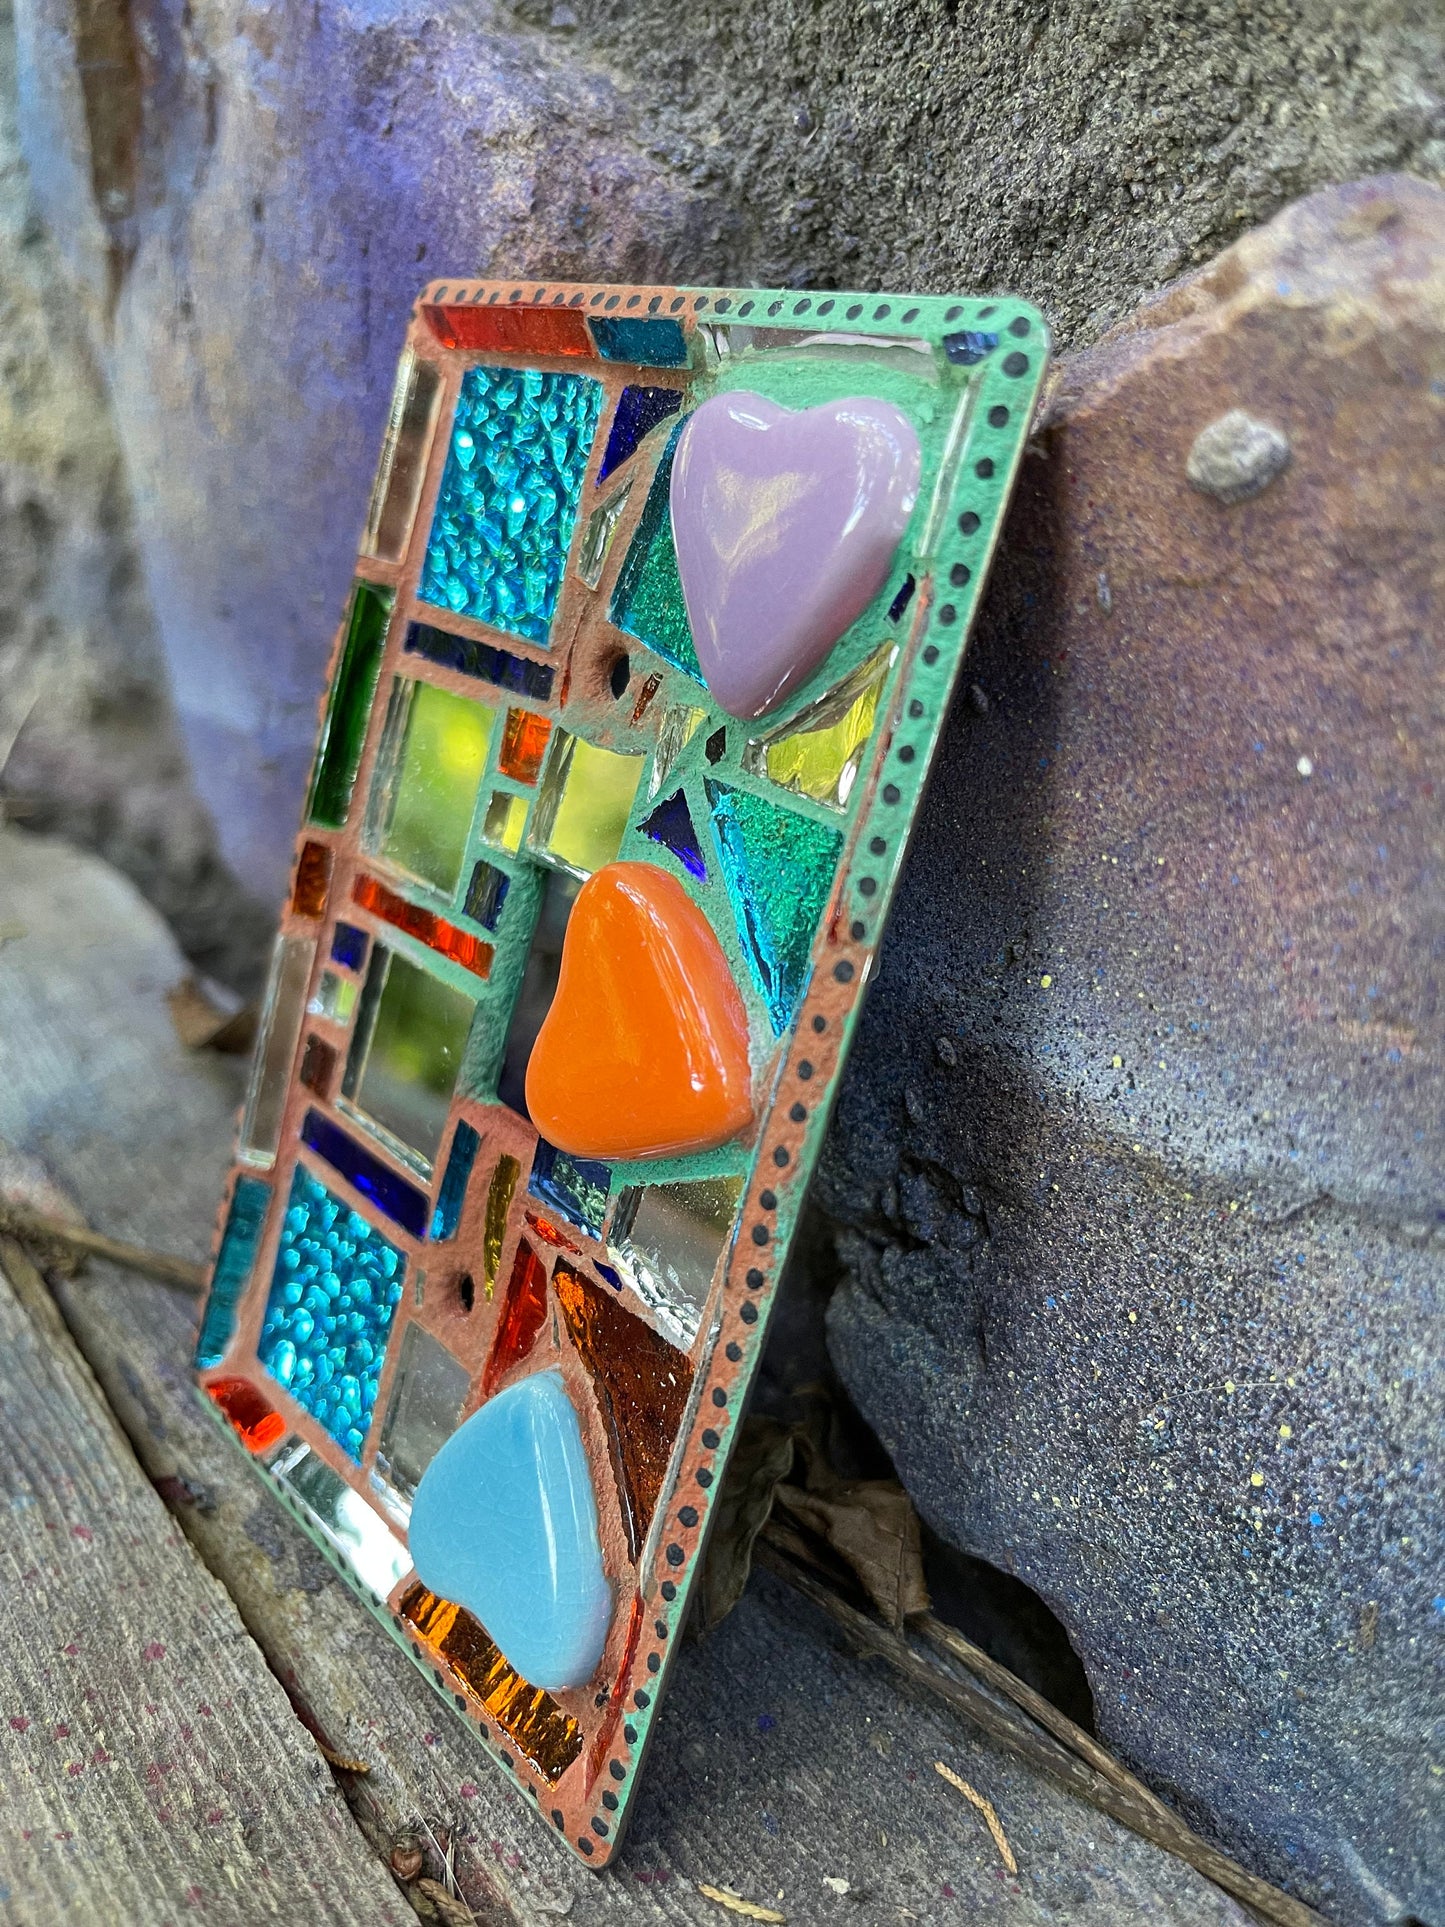 Heart Light Switch Cover, Fancy Light Switch Cover, Mosaic Switch Cover, Contemporary Sparkly Mosaic Switch Cover, One Toggle Switch Cover